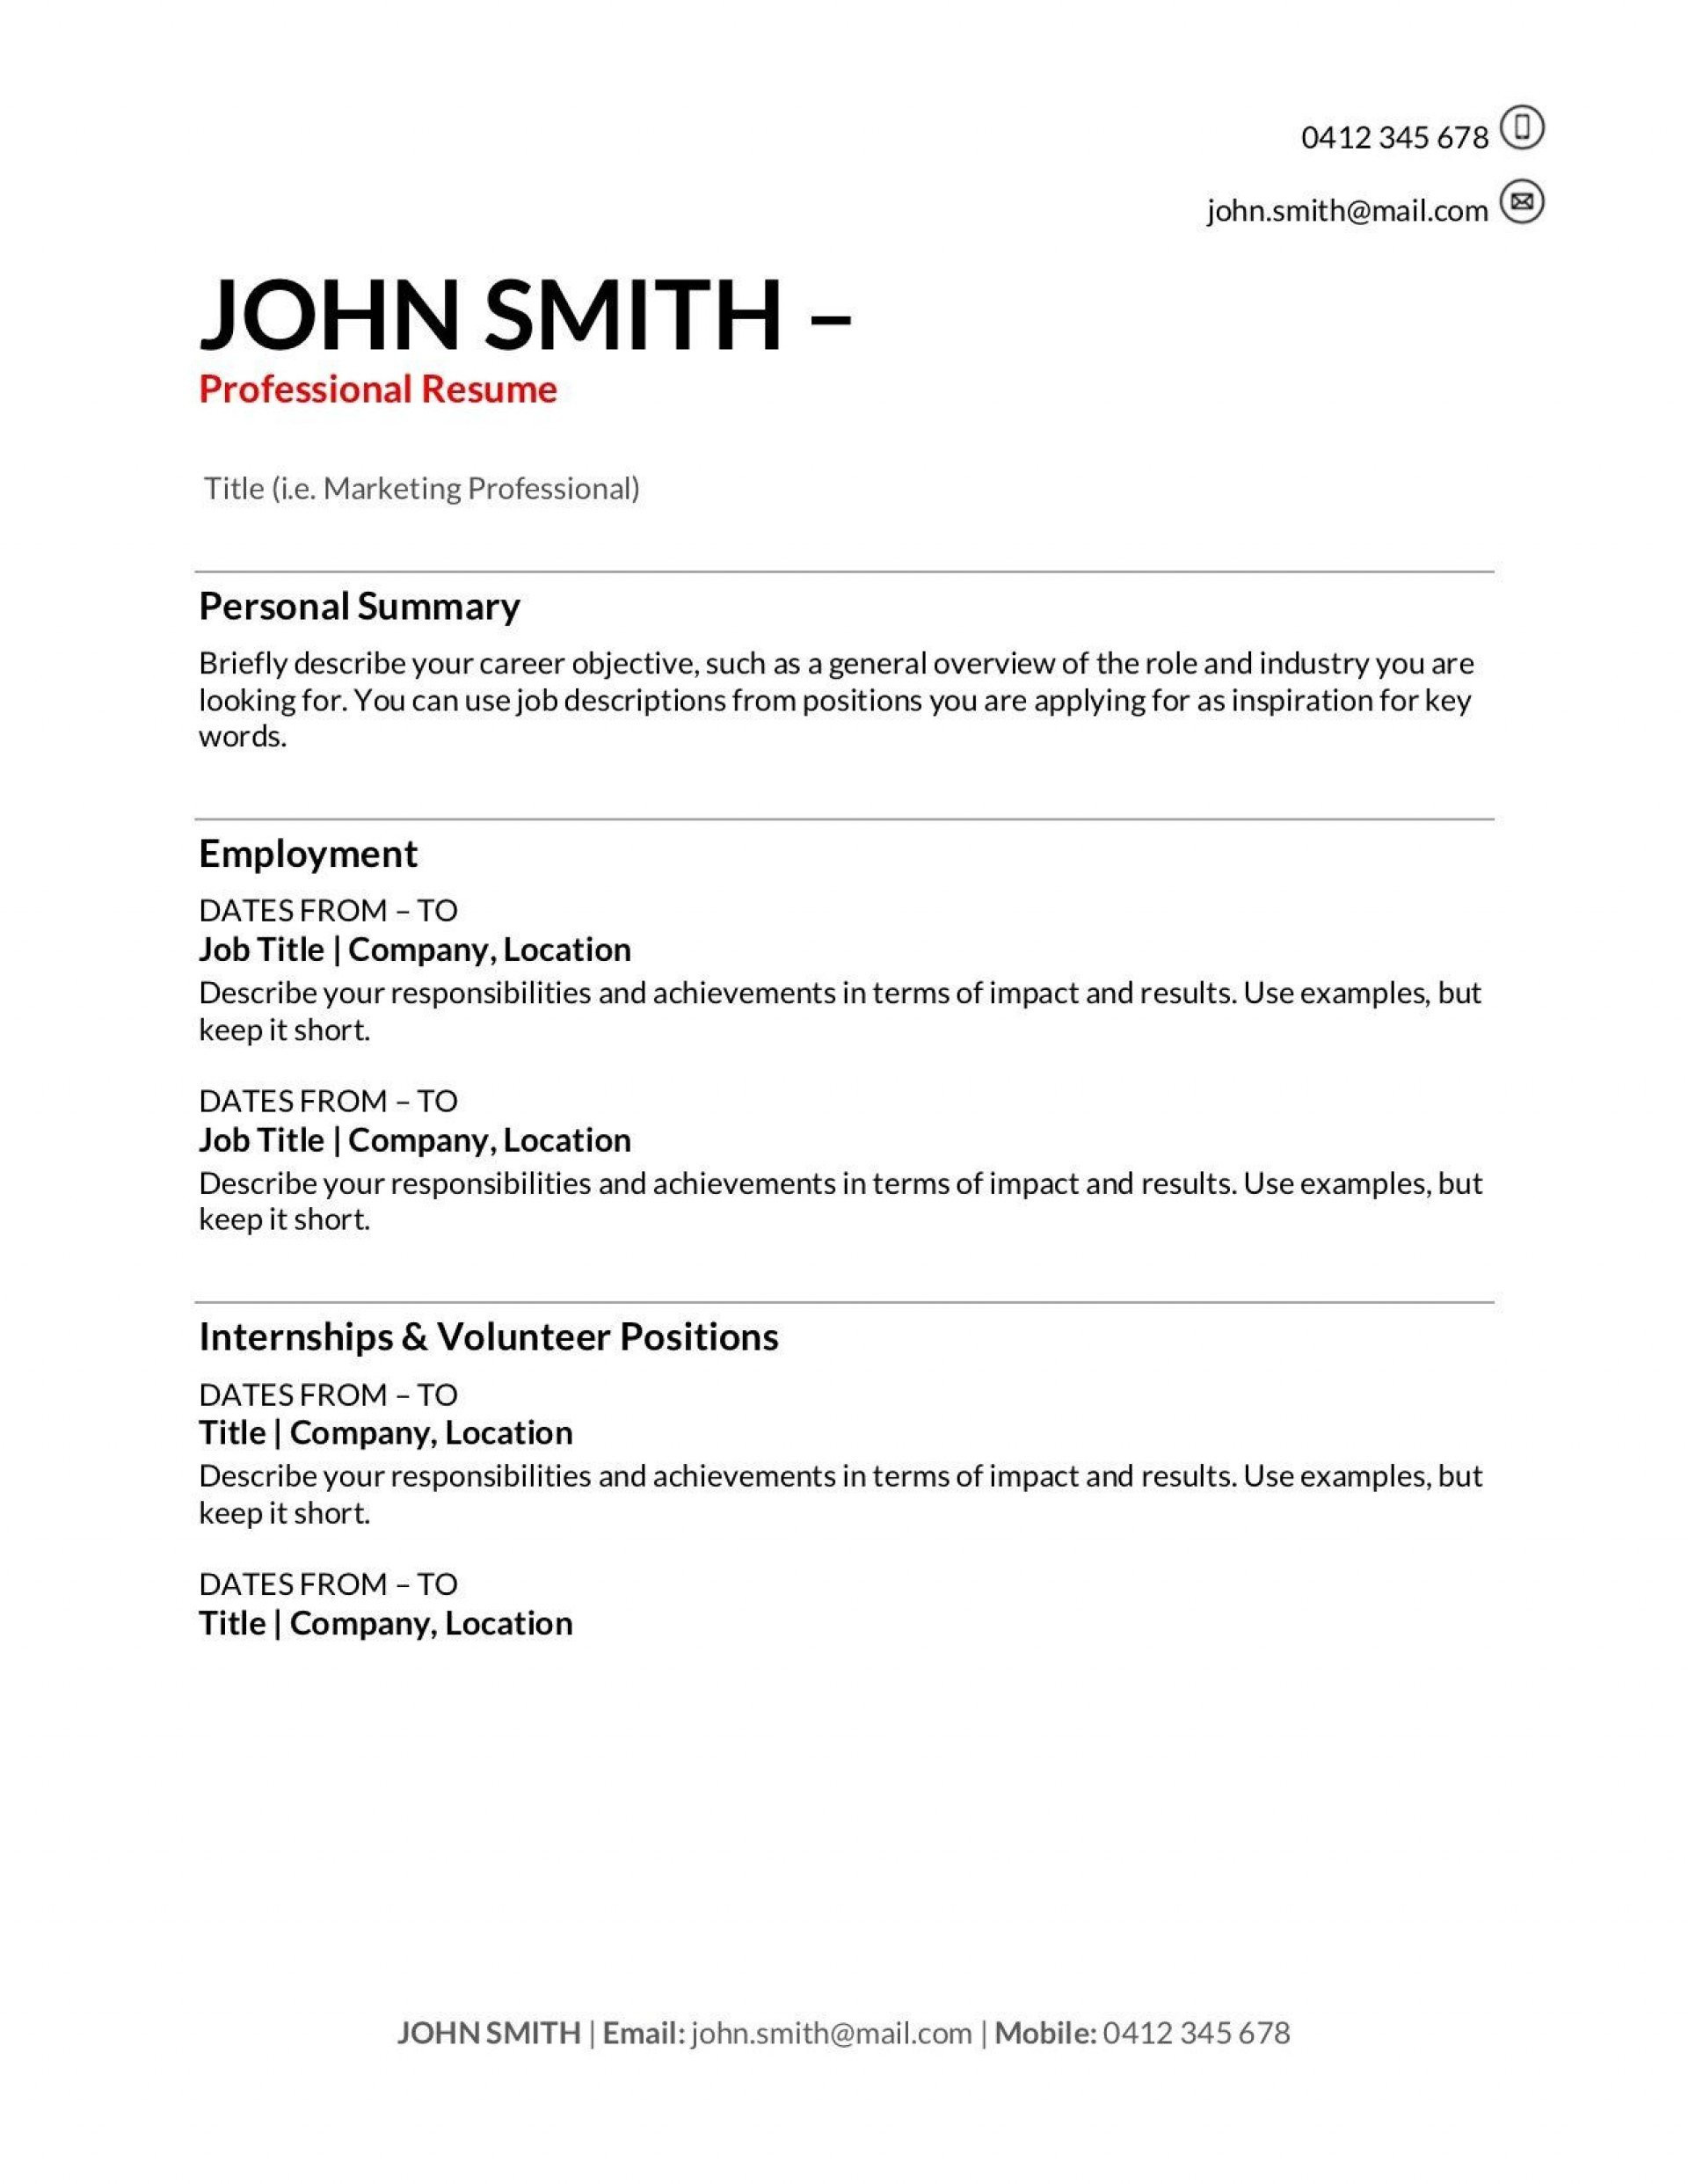 Resume for First Job No Experience Template How to Make A Resume for Your First Job – Master Your Resume